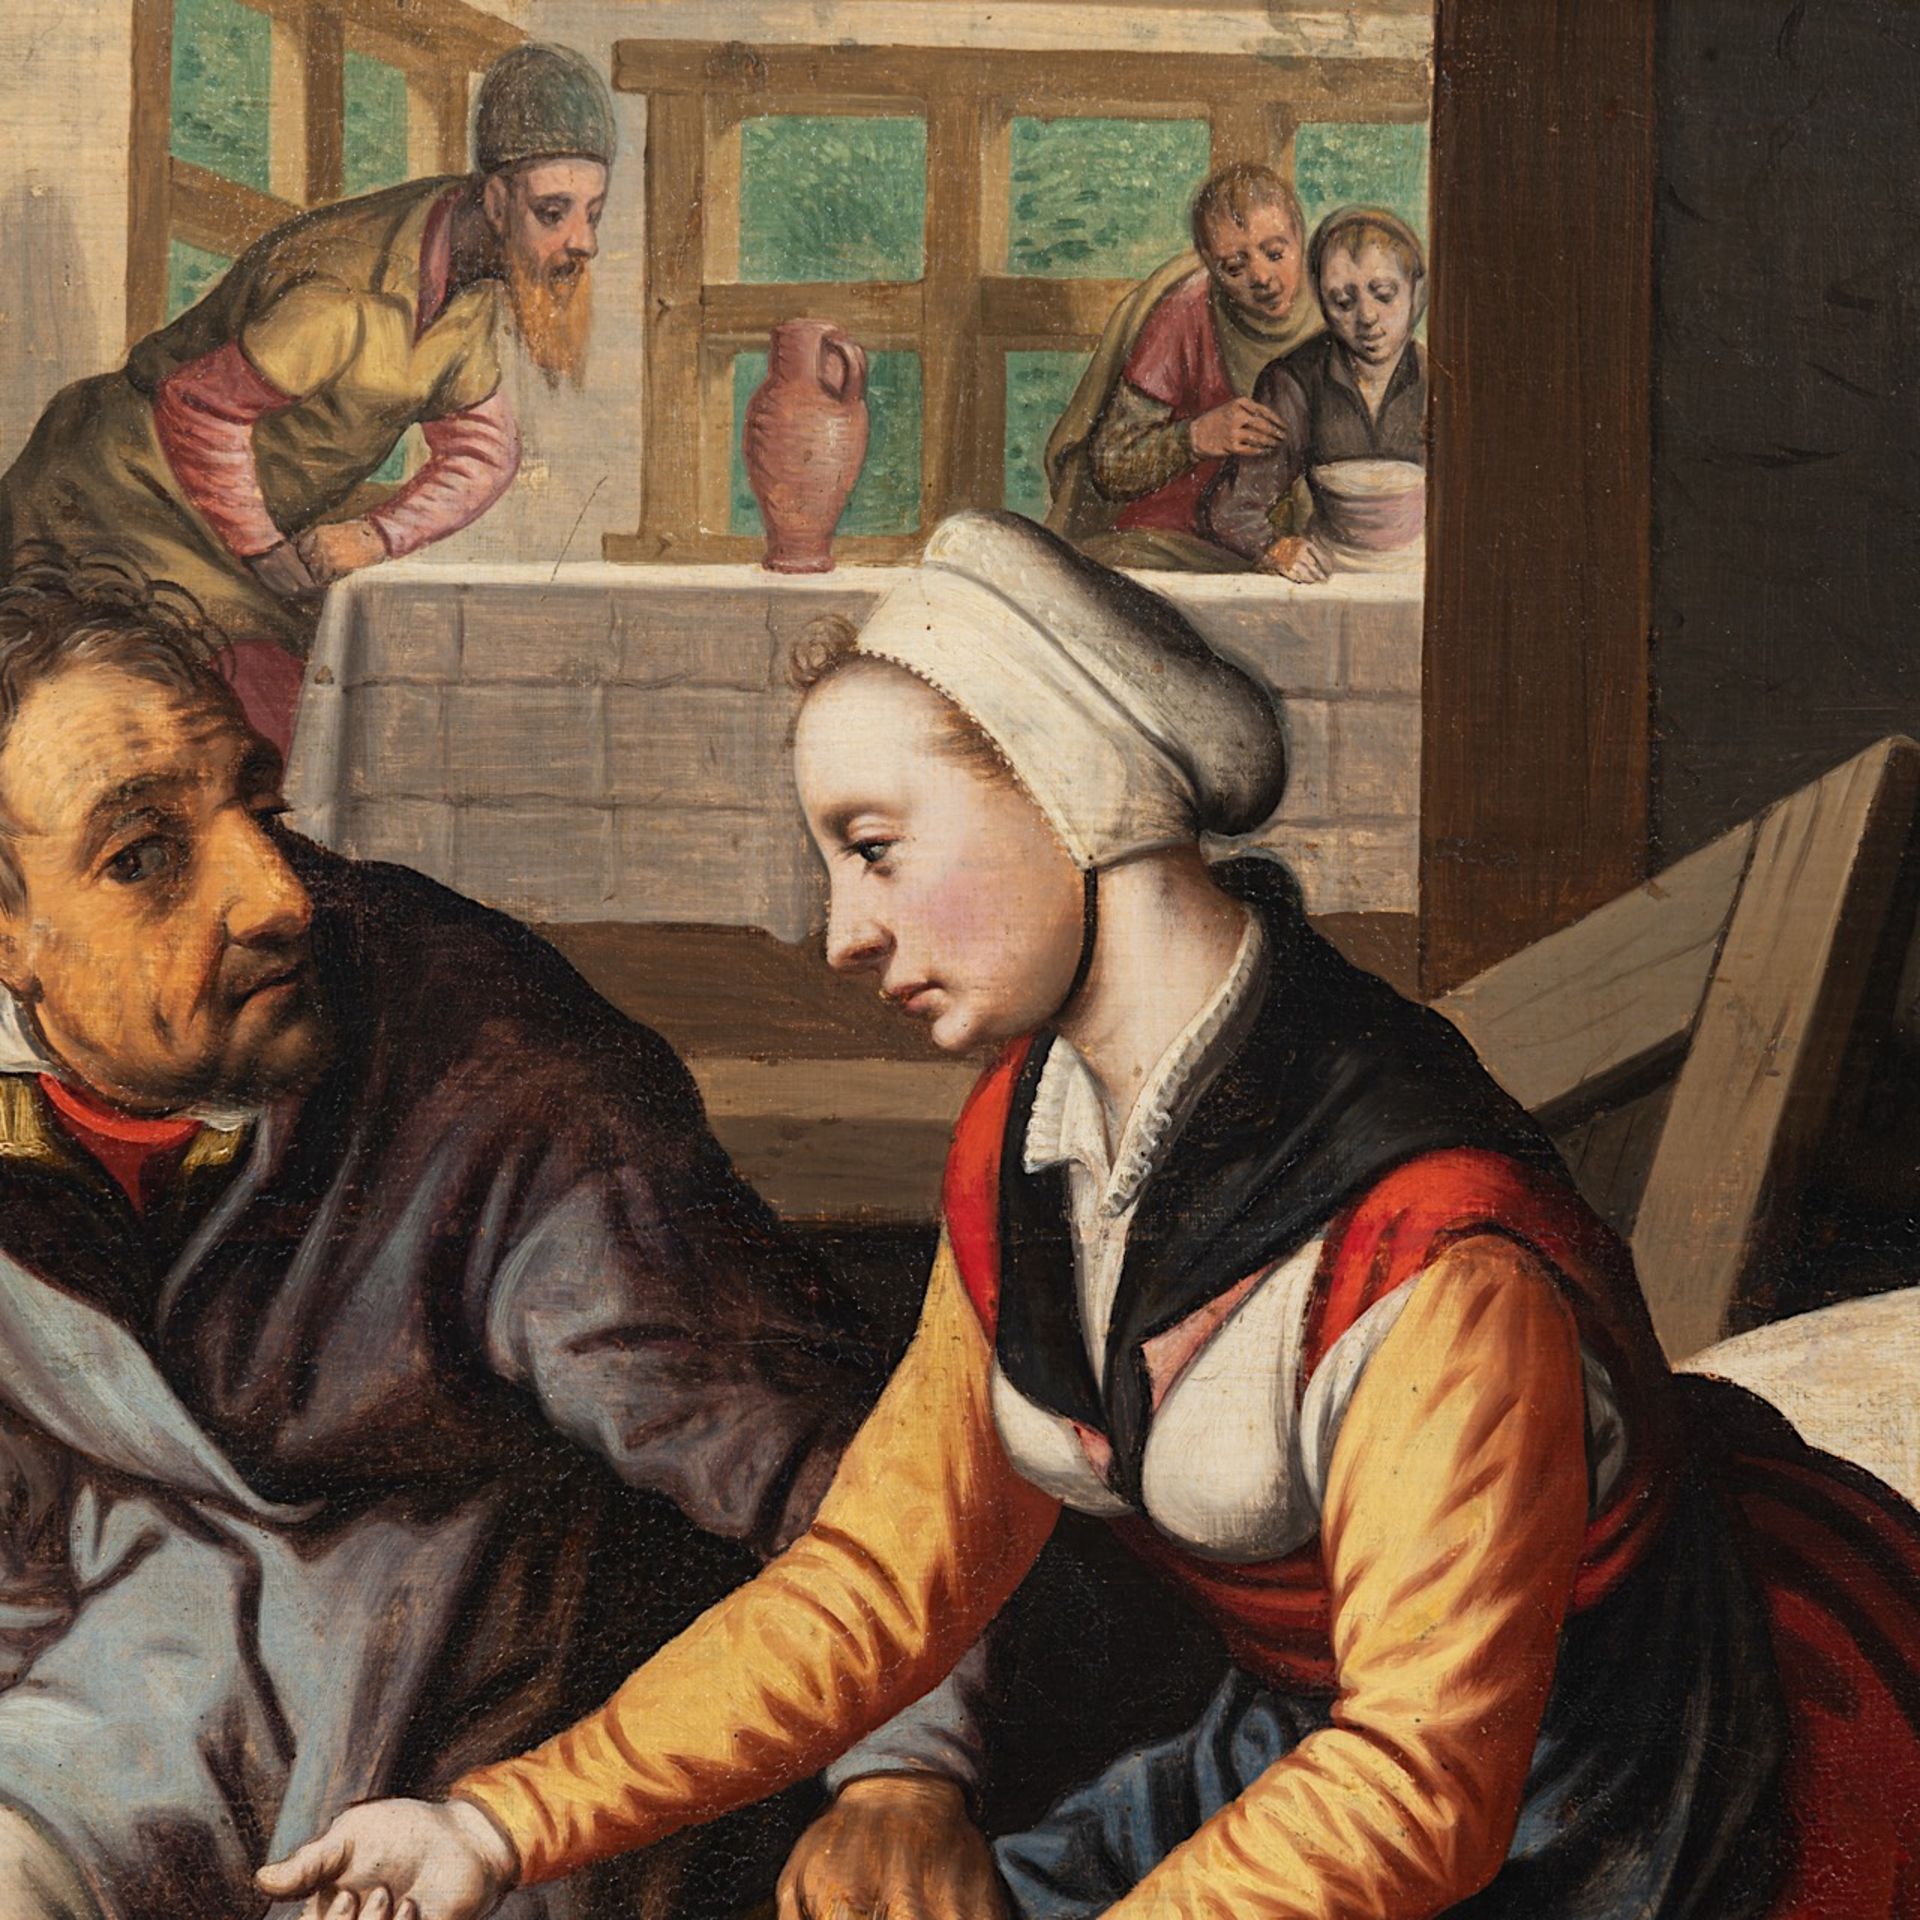 Attrib. to Pieter Aertsen (1507/08-1575), kitchenmaid and customers in a hostel, oil on canvas 81 x - Image 5 of 6